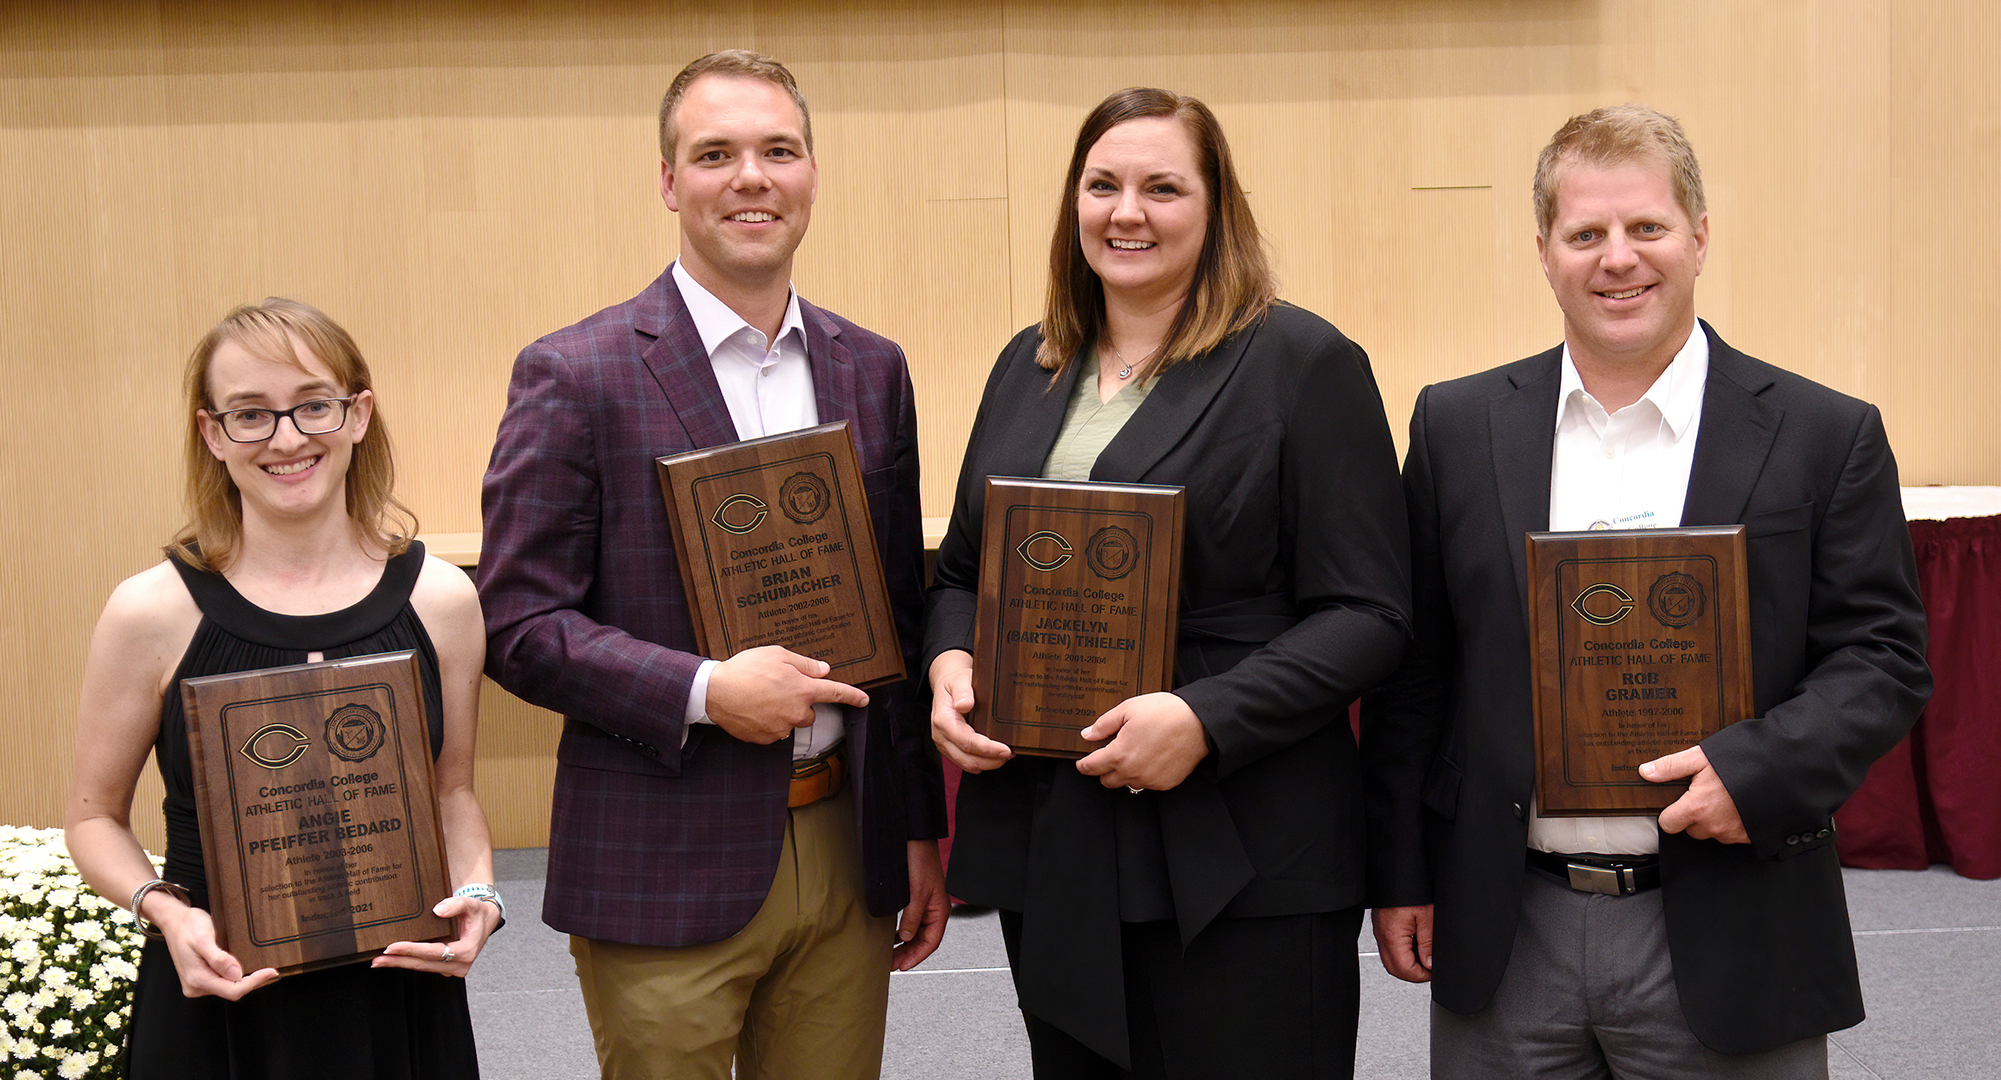 Former Concordia standout athletes (L-R) 6-time Track & Field All-American Angie Pfeiffer Bedard, 2-time football MIAC MVP Brian Schumacher, 2-time volleyball All-American Jacki (Barten) Thielen & hockey All-American Rob Gramer were inducted into the Hall of Fame on Saturday.